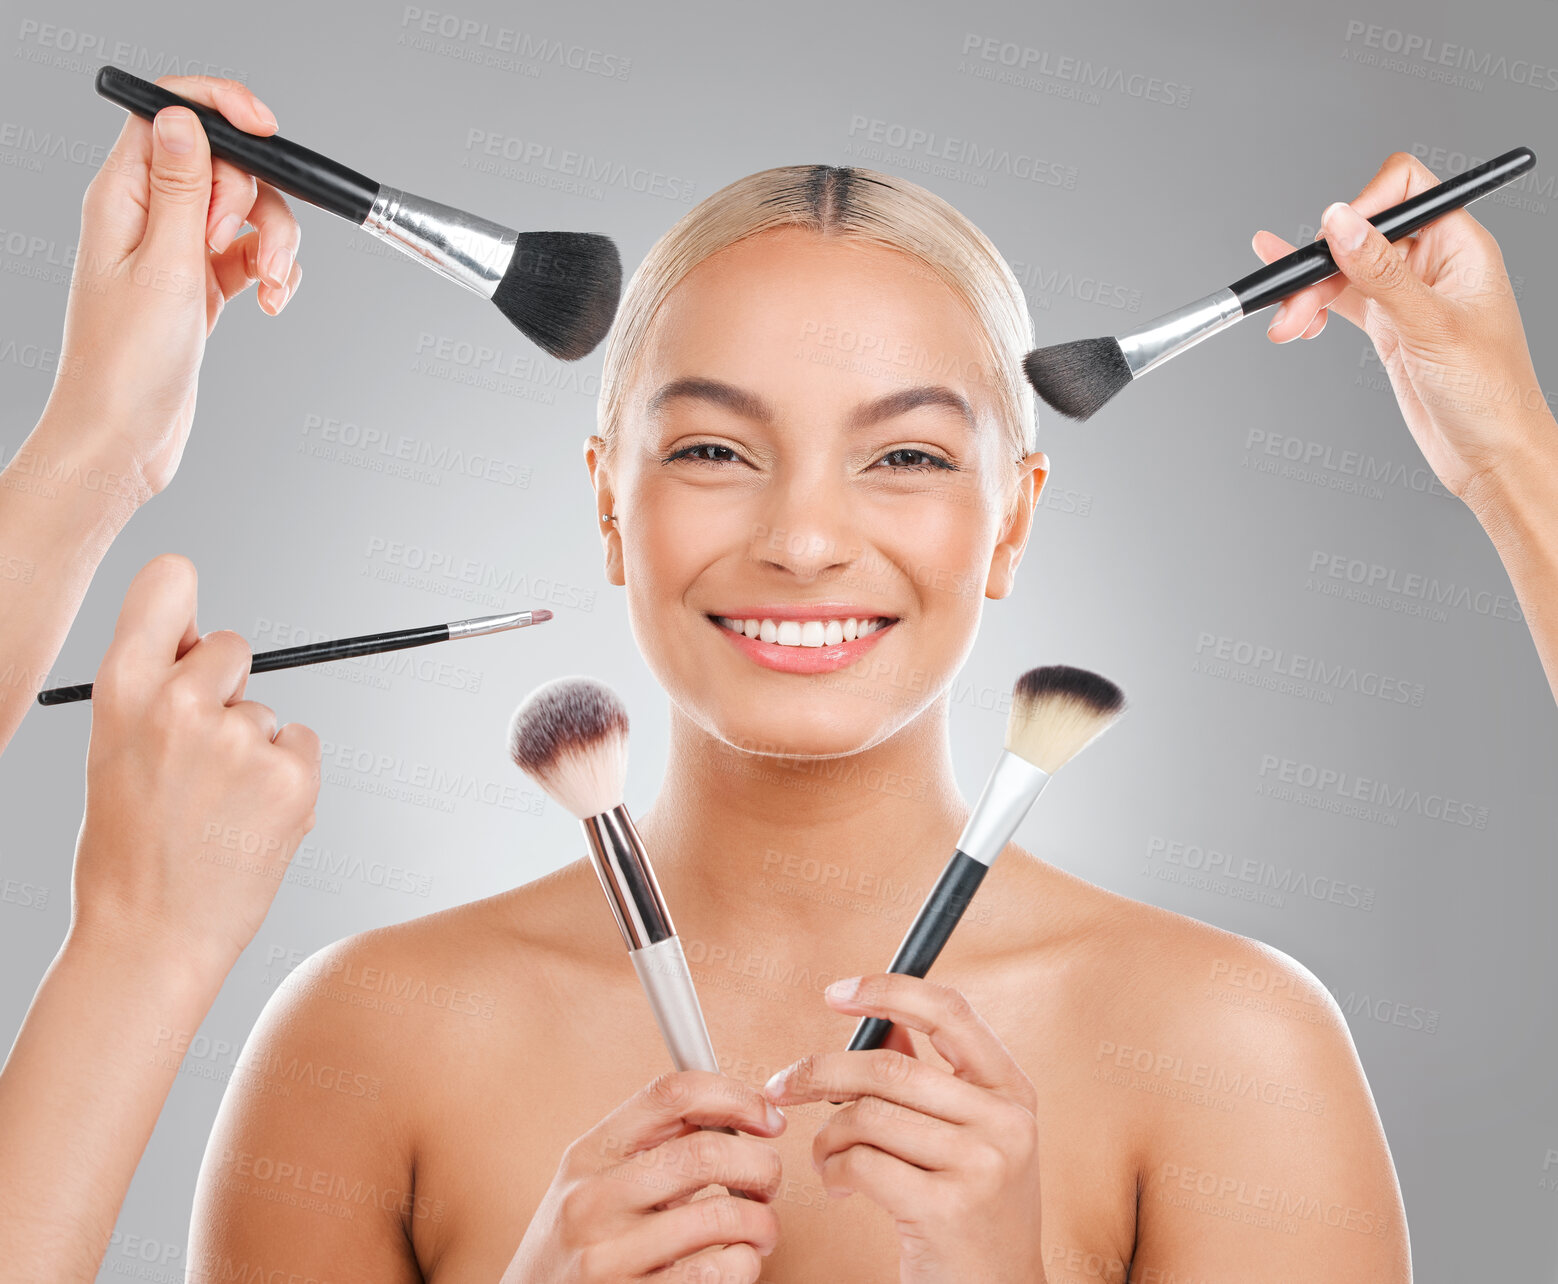 Buy stock photo Shot of an attractive young woman using a makeup brush against a studio background